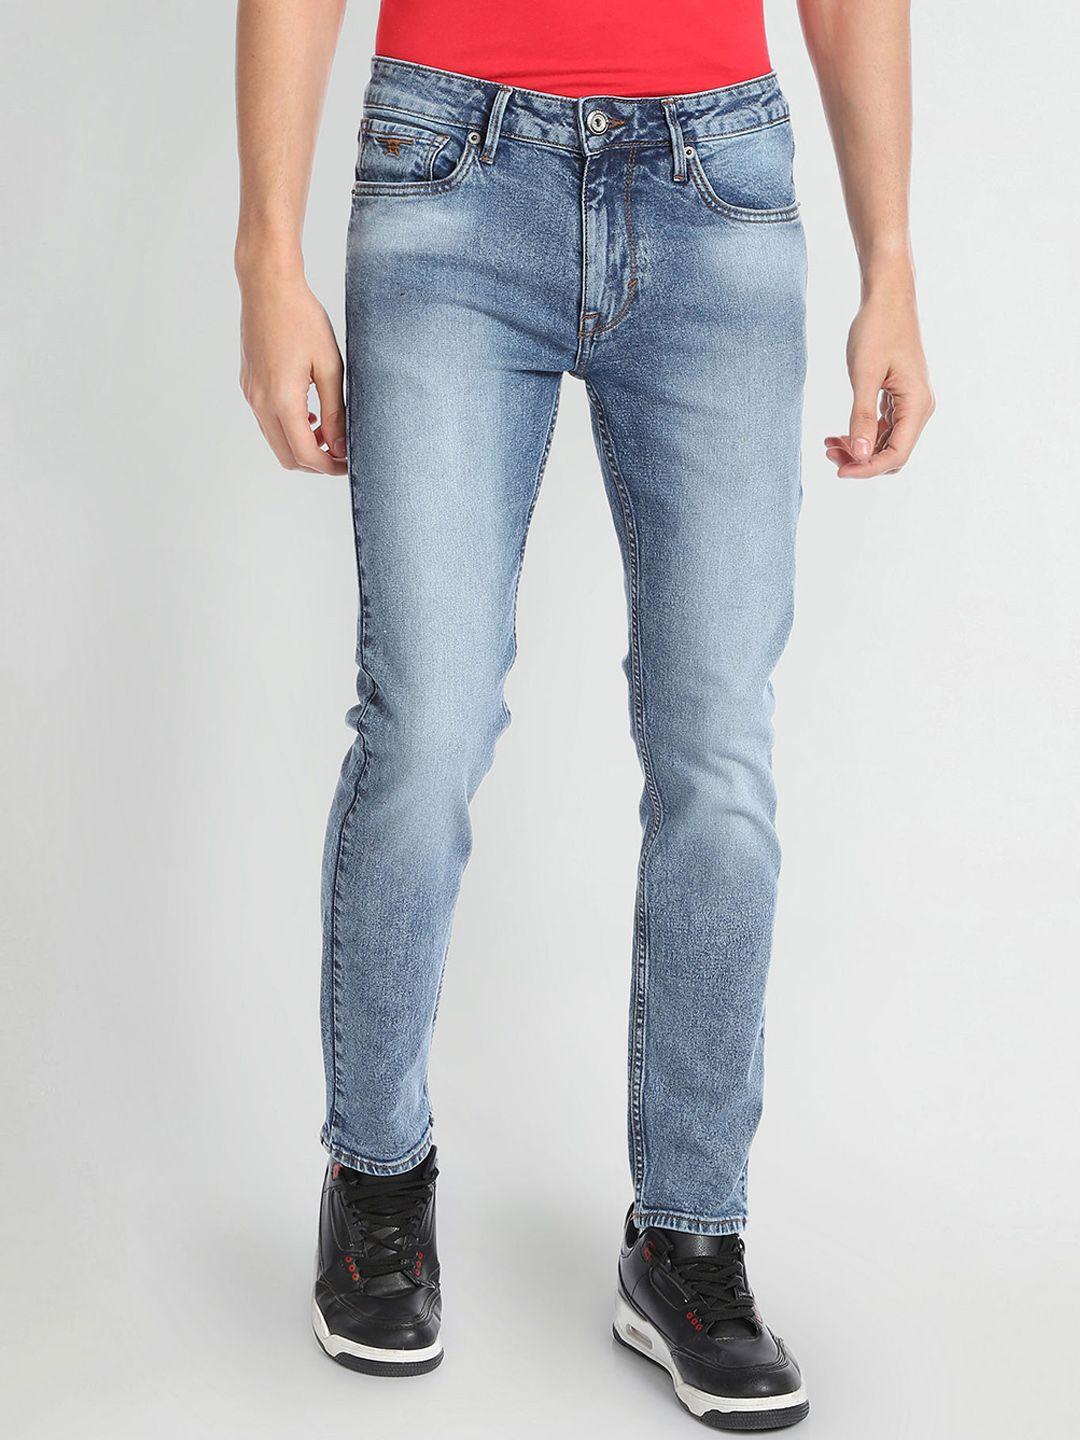 flying-machine-men-mid-rise-slim-fit-stone-wash-heavy-fade-stretchable-jeans